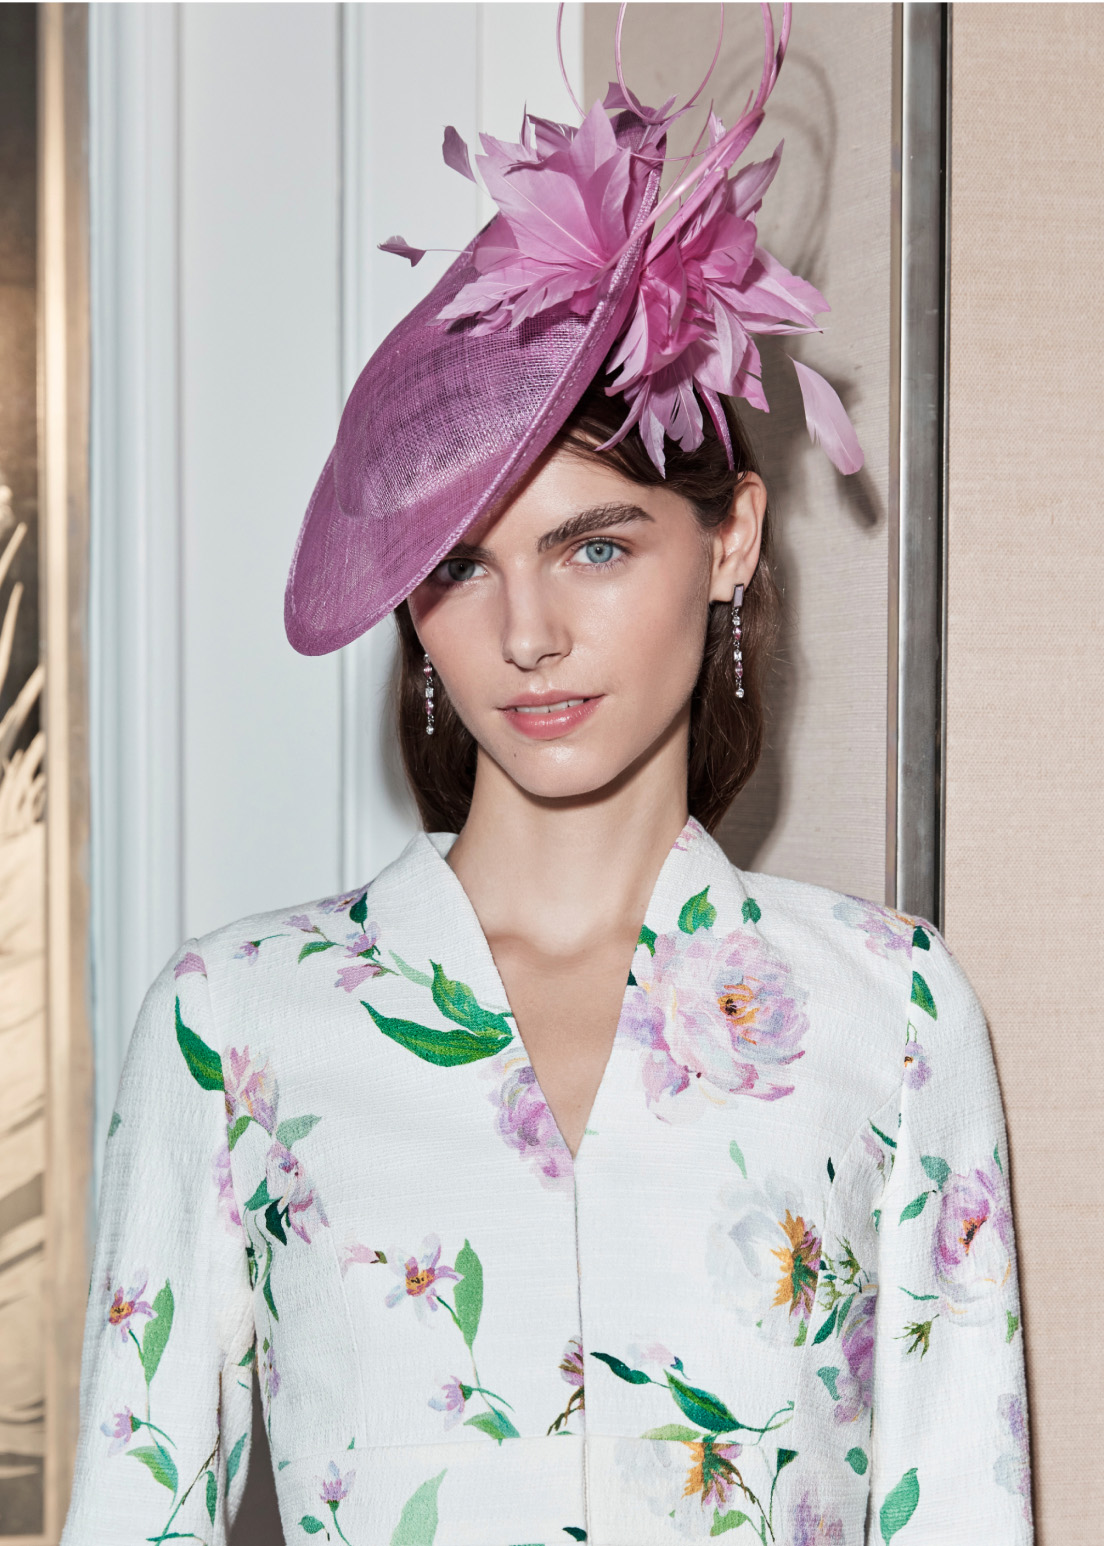 Image of model wearing a pink fascinator at a wedding.